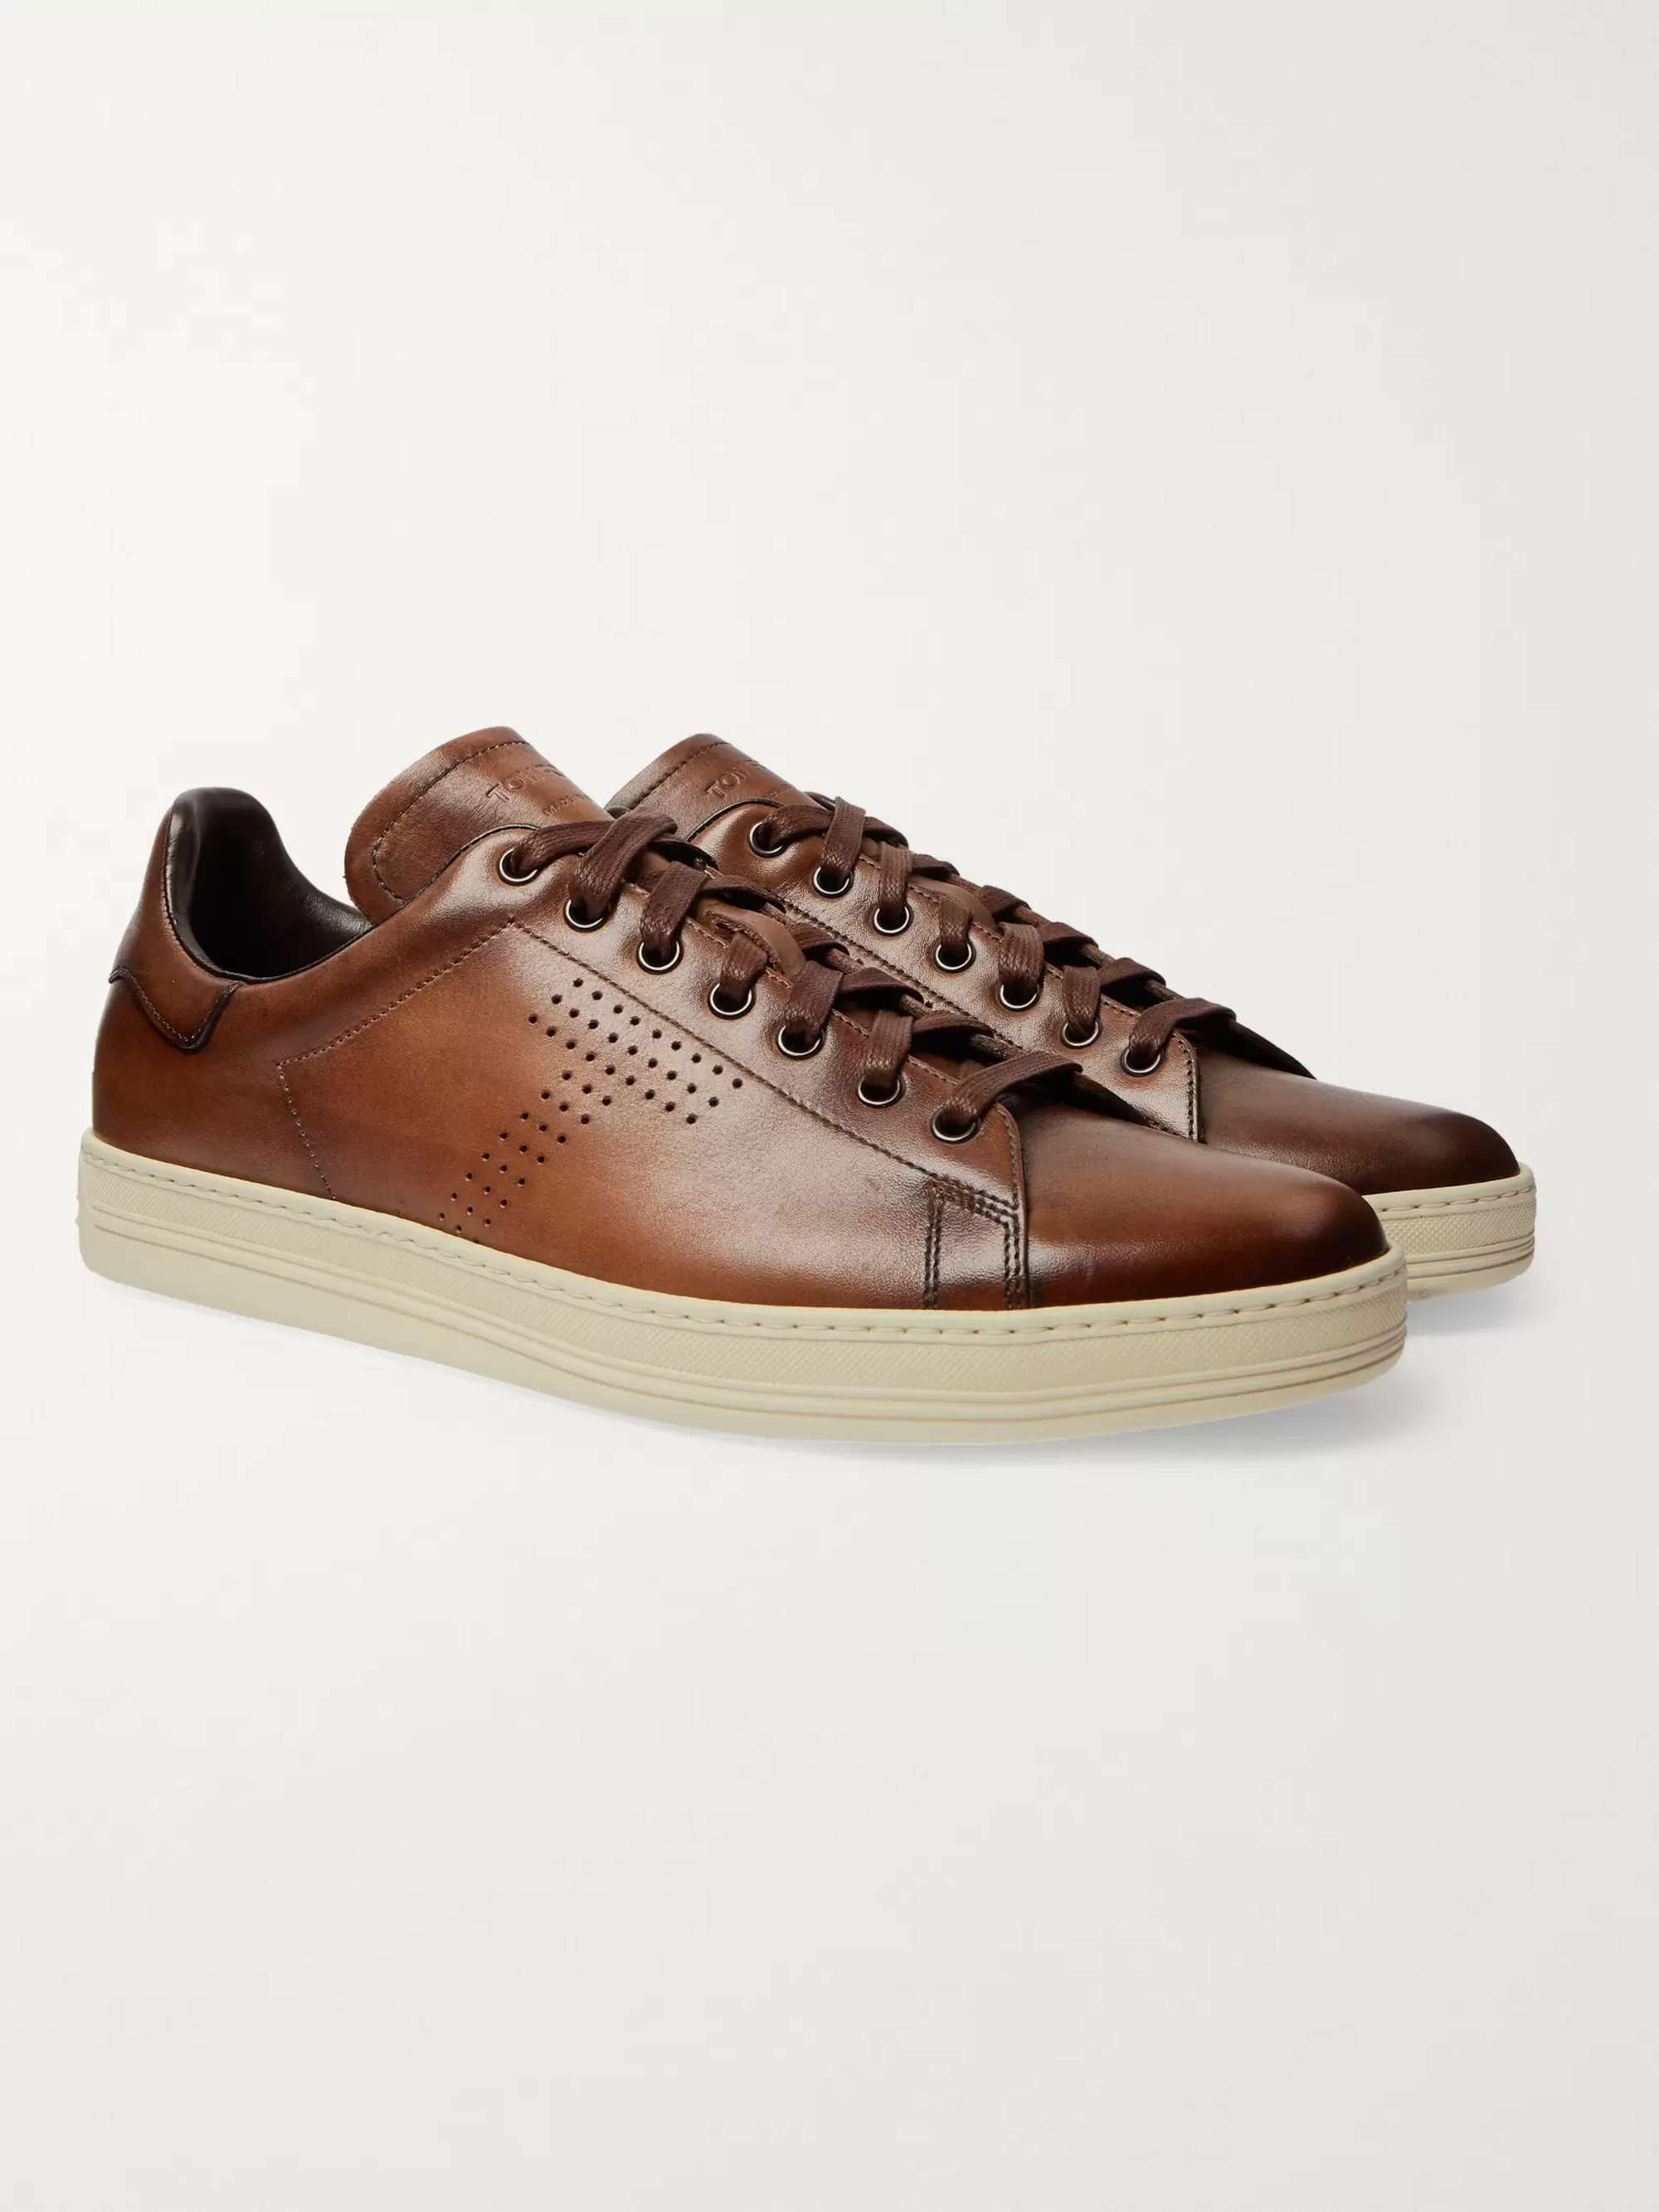 TOM FORD Warwick Burnished-Leather Sneakers